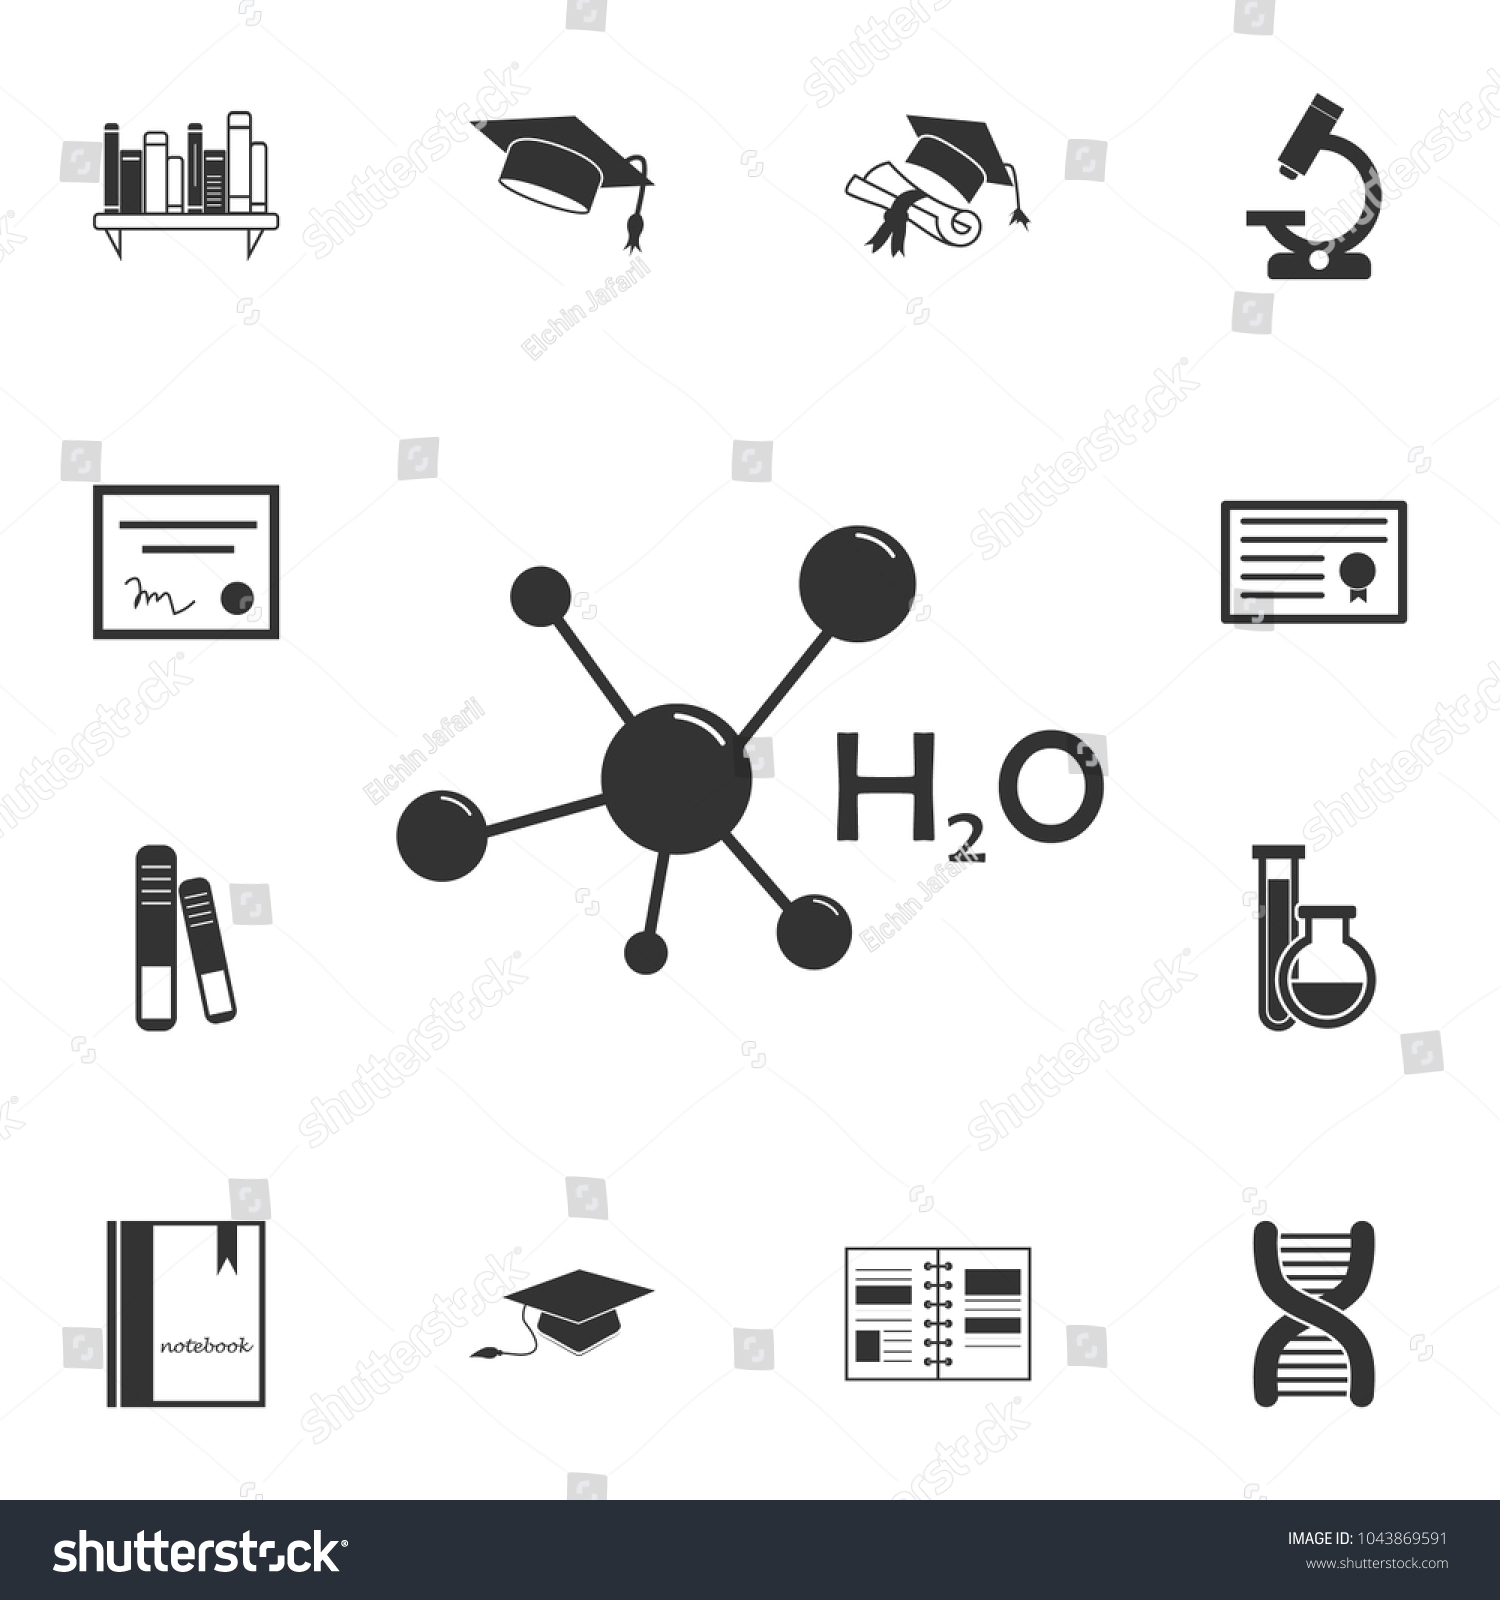 SVG of Carbonic acid molecule icon. Detailed set of education element icons. Premium quality graphic design. One of the collection icons for websites, web design, mobile app on white background svg